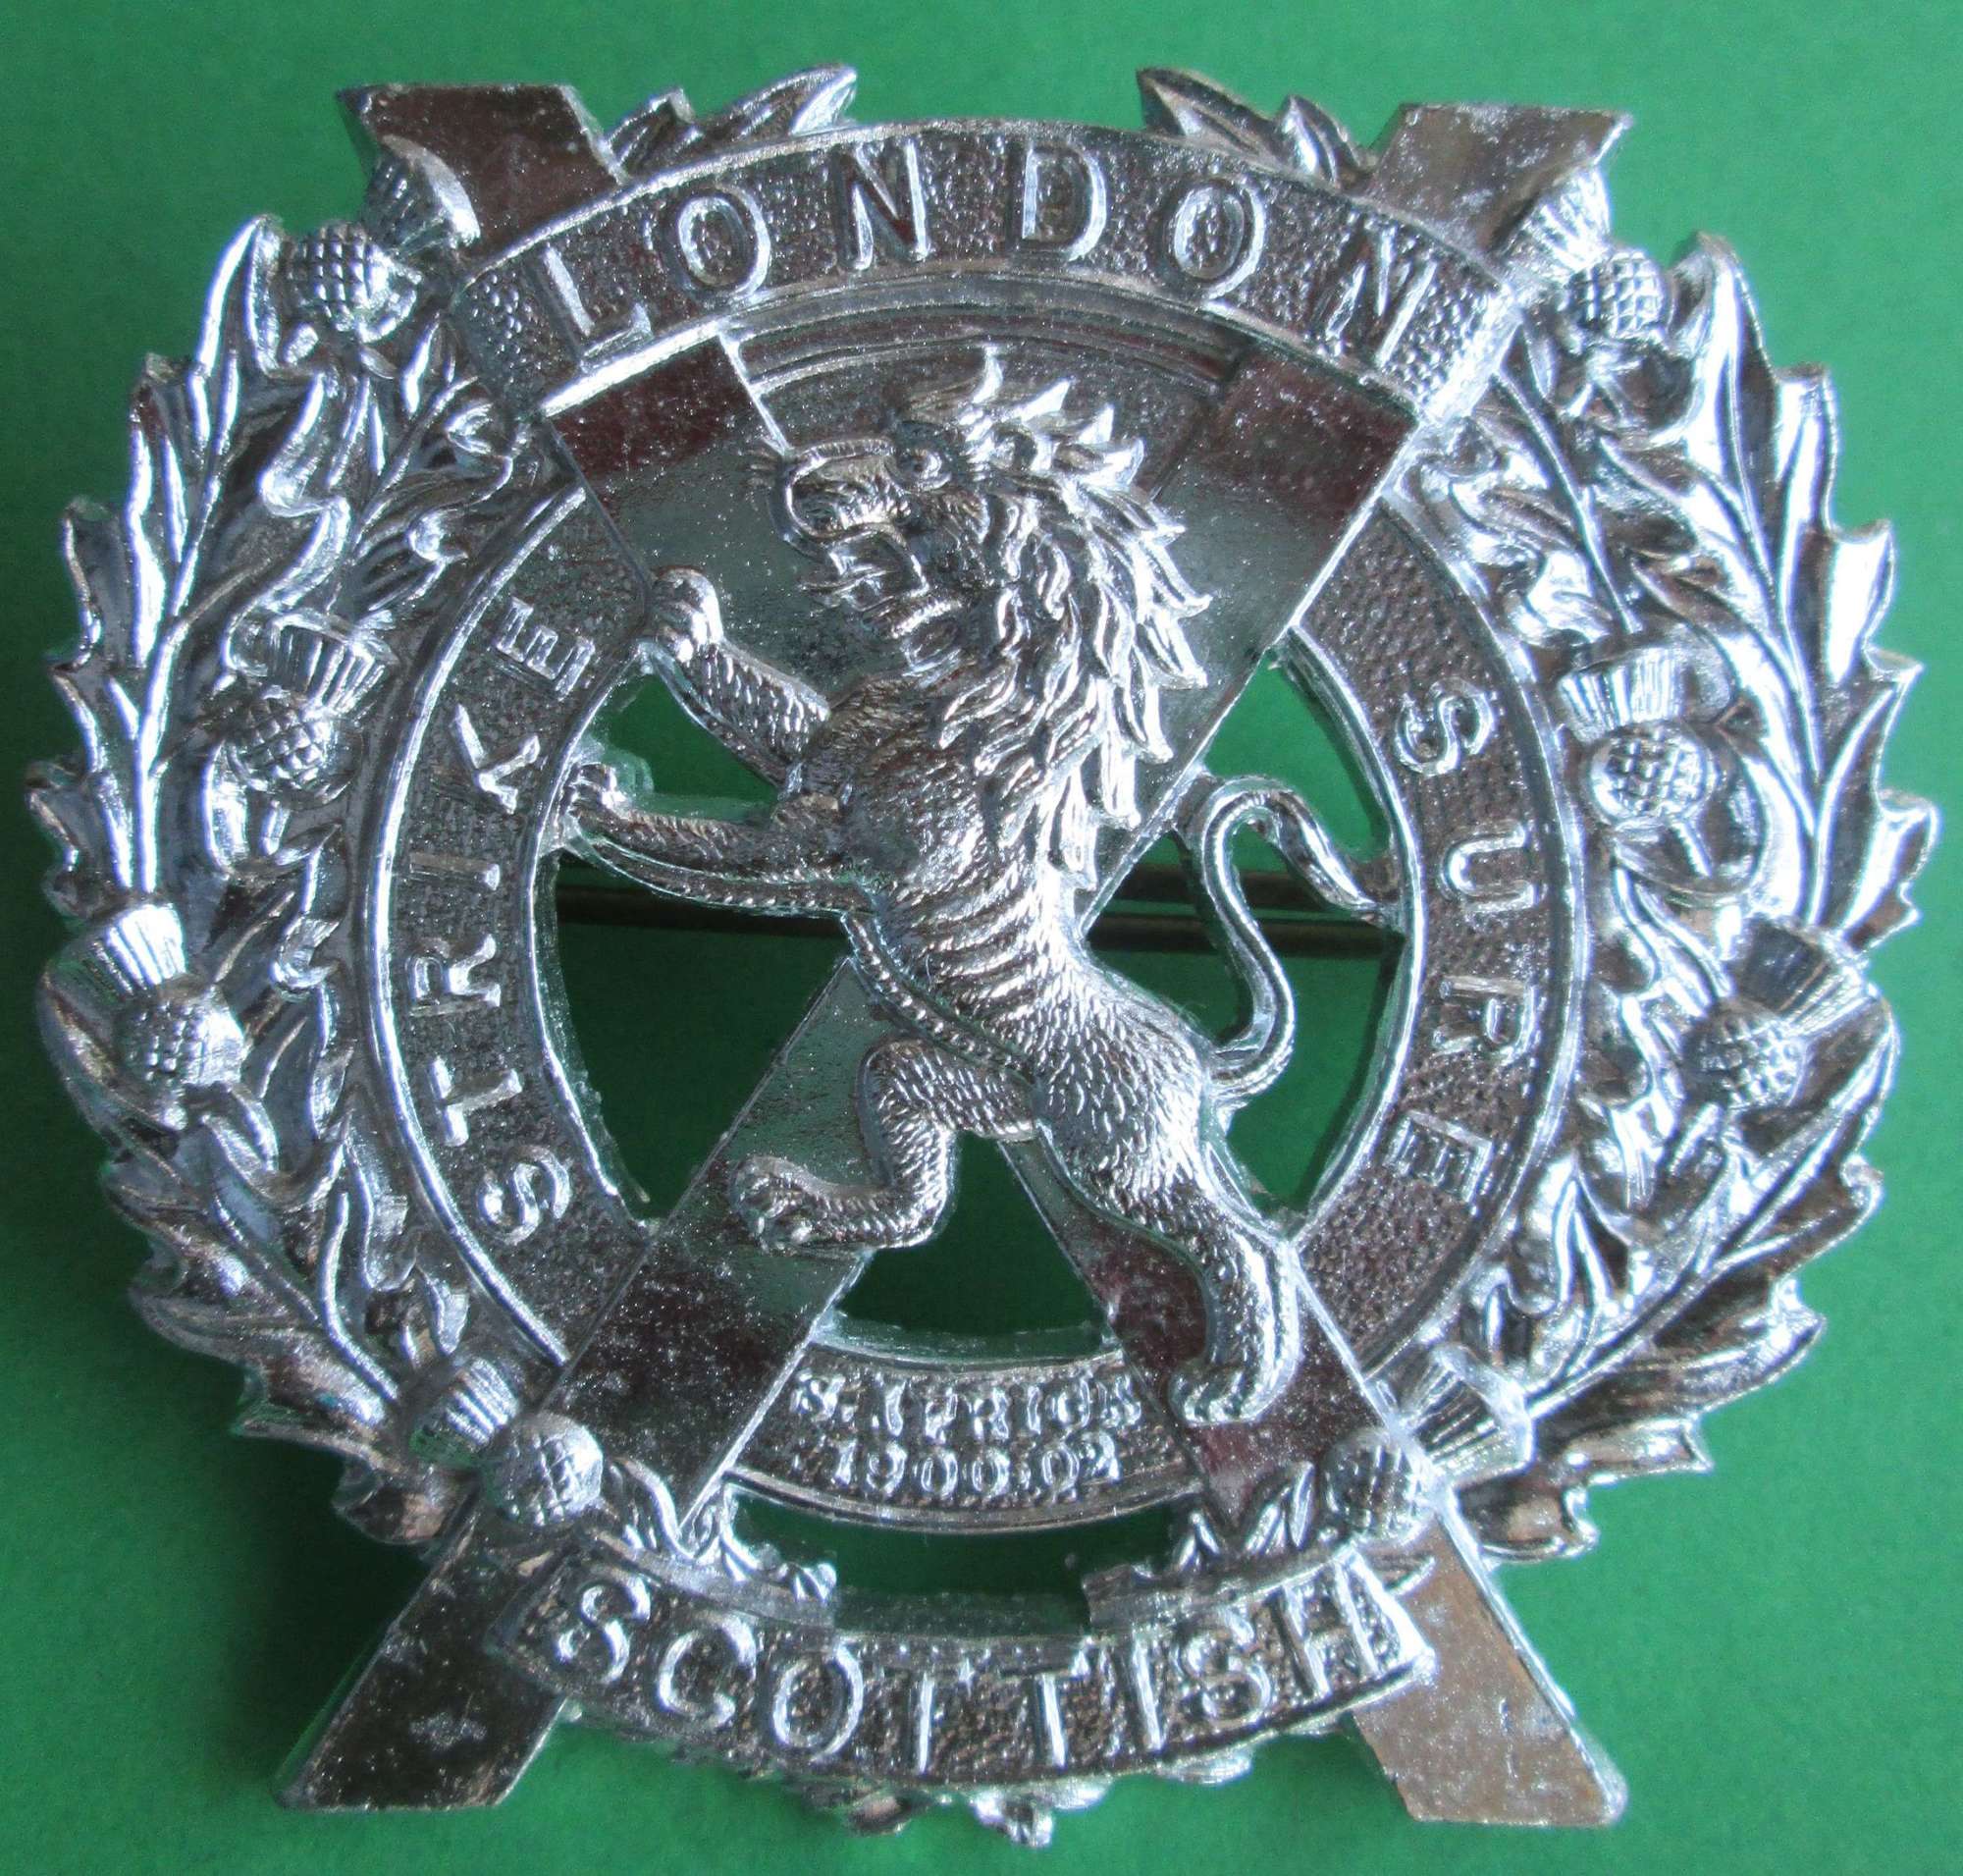 AN ANODISED METAL 14TH LONDON REGIMENT BADGE